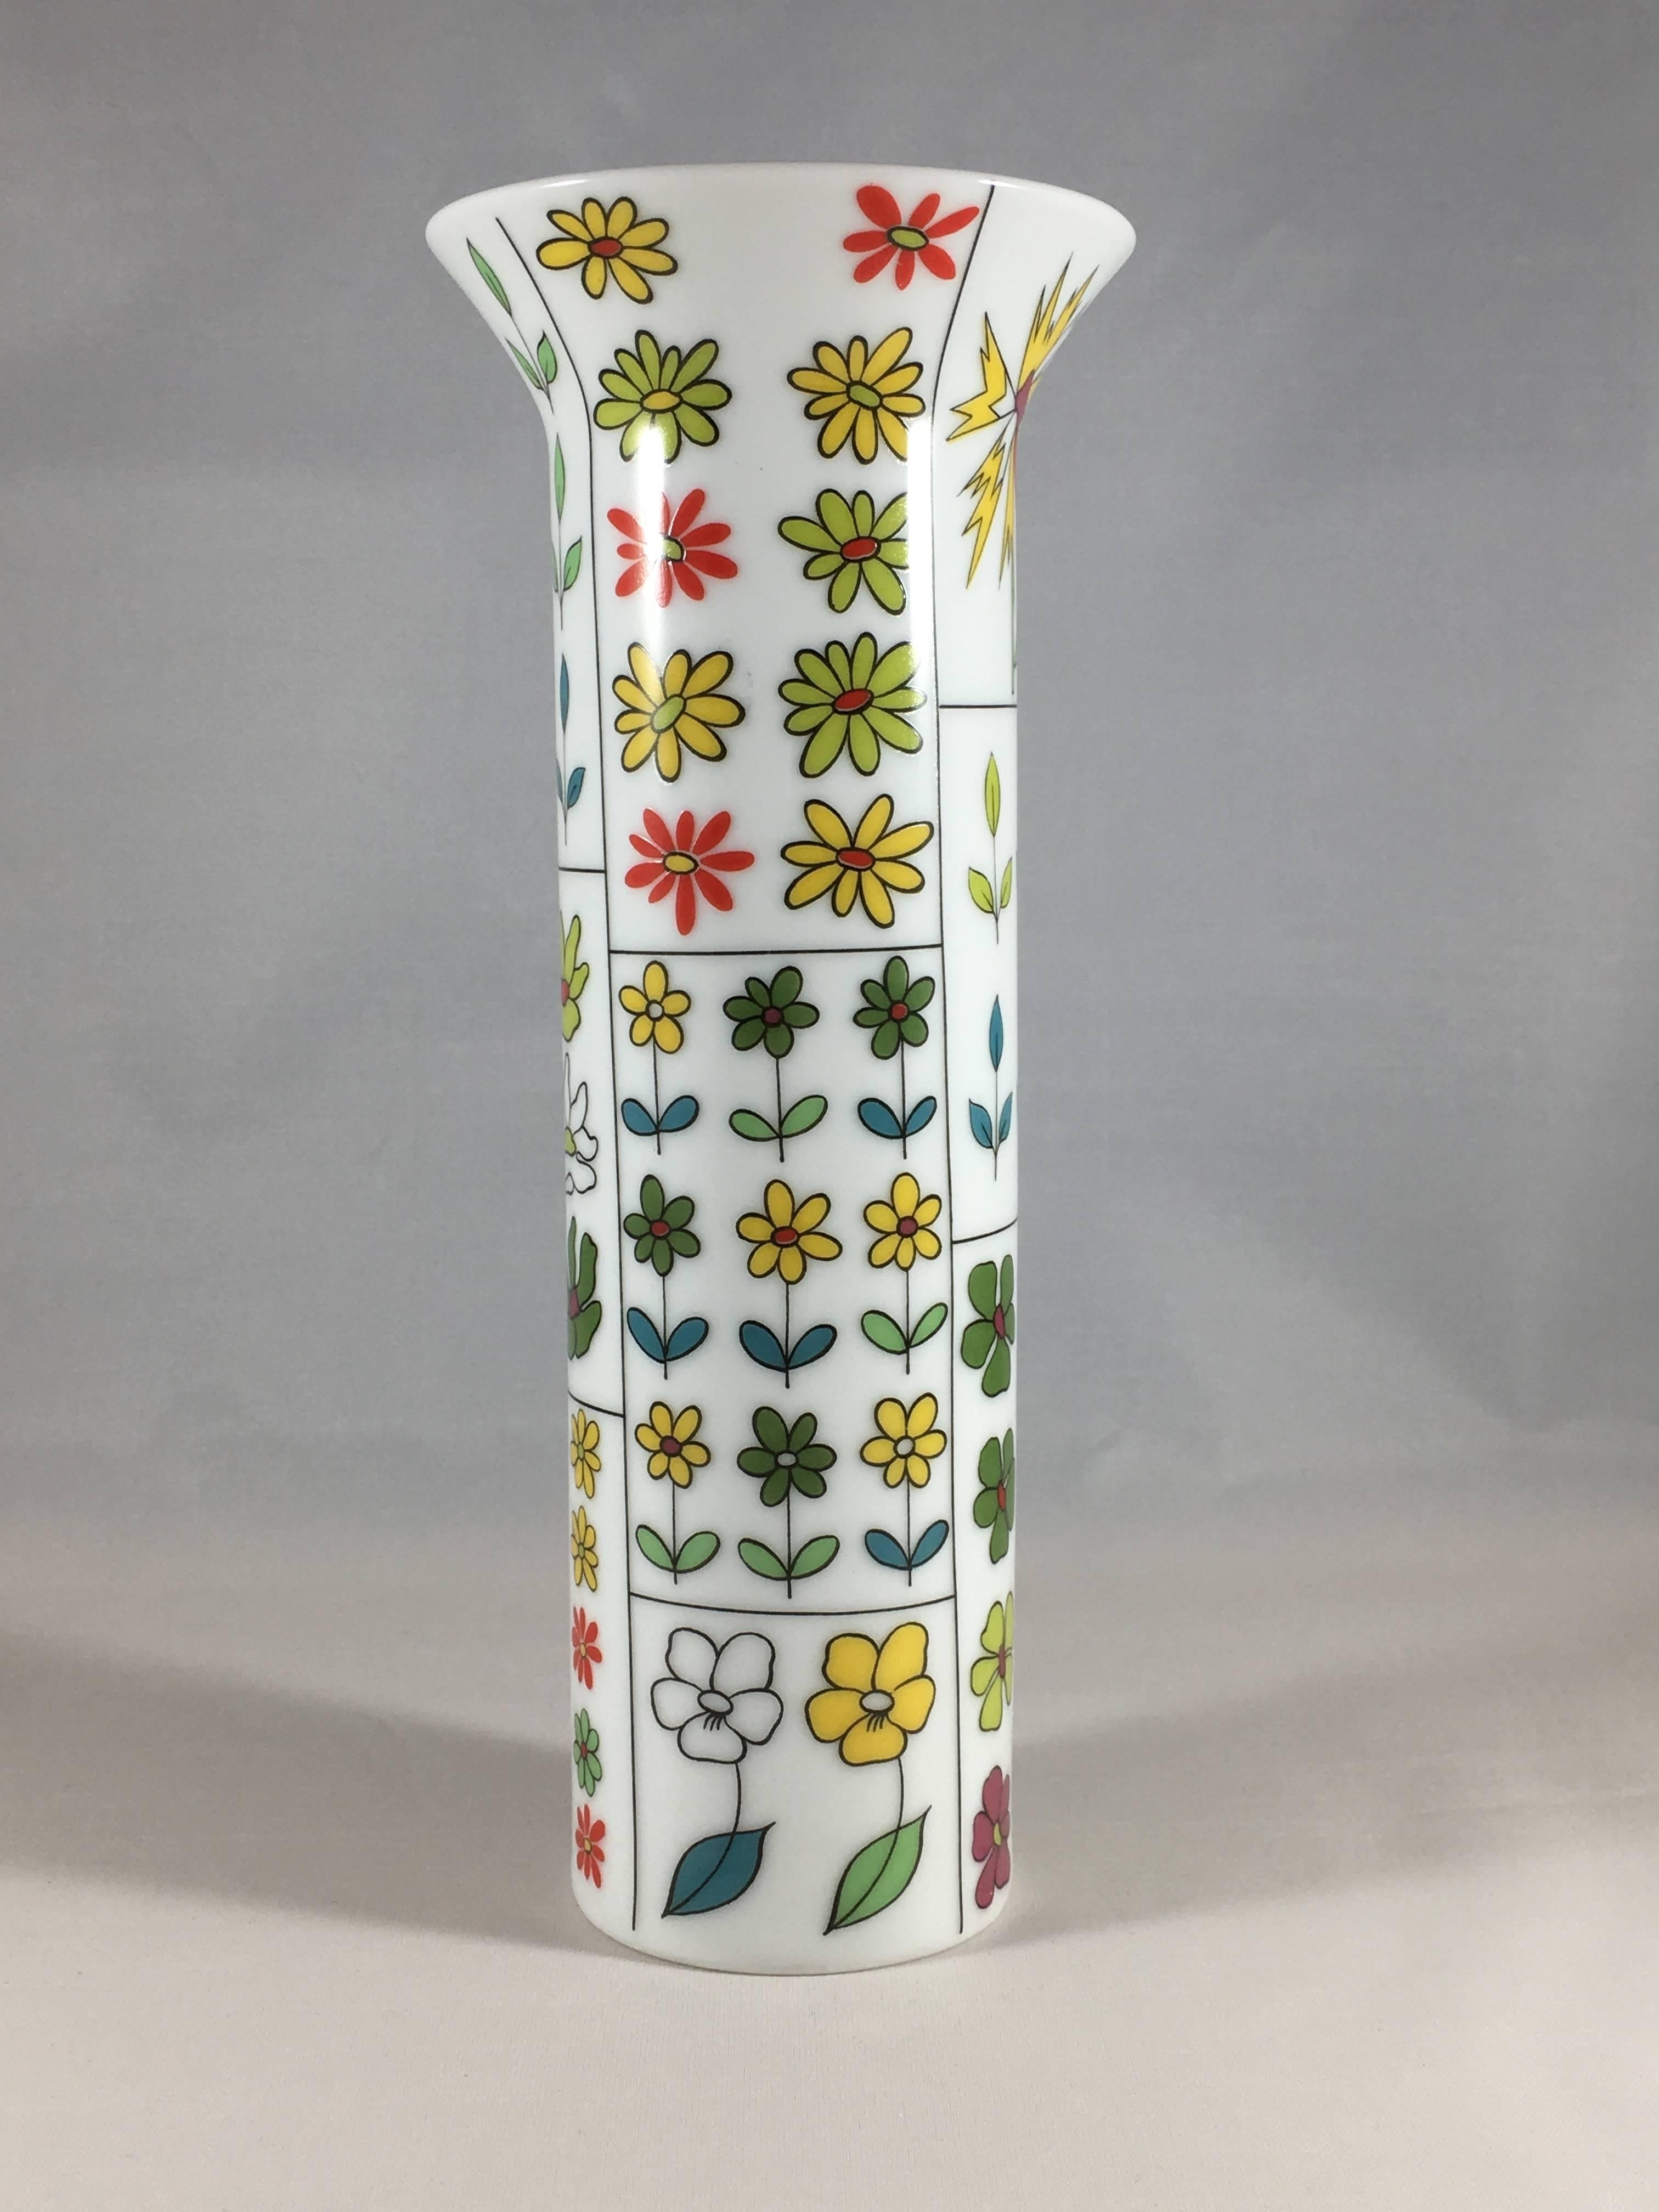 This is such a fun vase designed by Emilio Pucci for Rosenthal. It is in excellent condition and features different mod 1960s flowers. It is signed on the bottom of the vase (see image #5) and measures 7 1/2